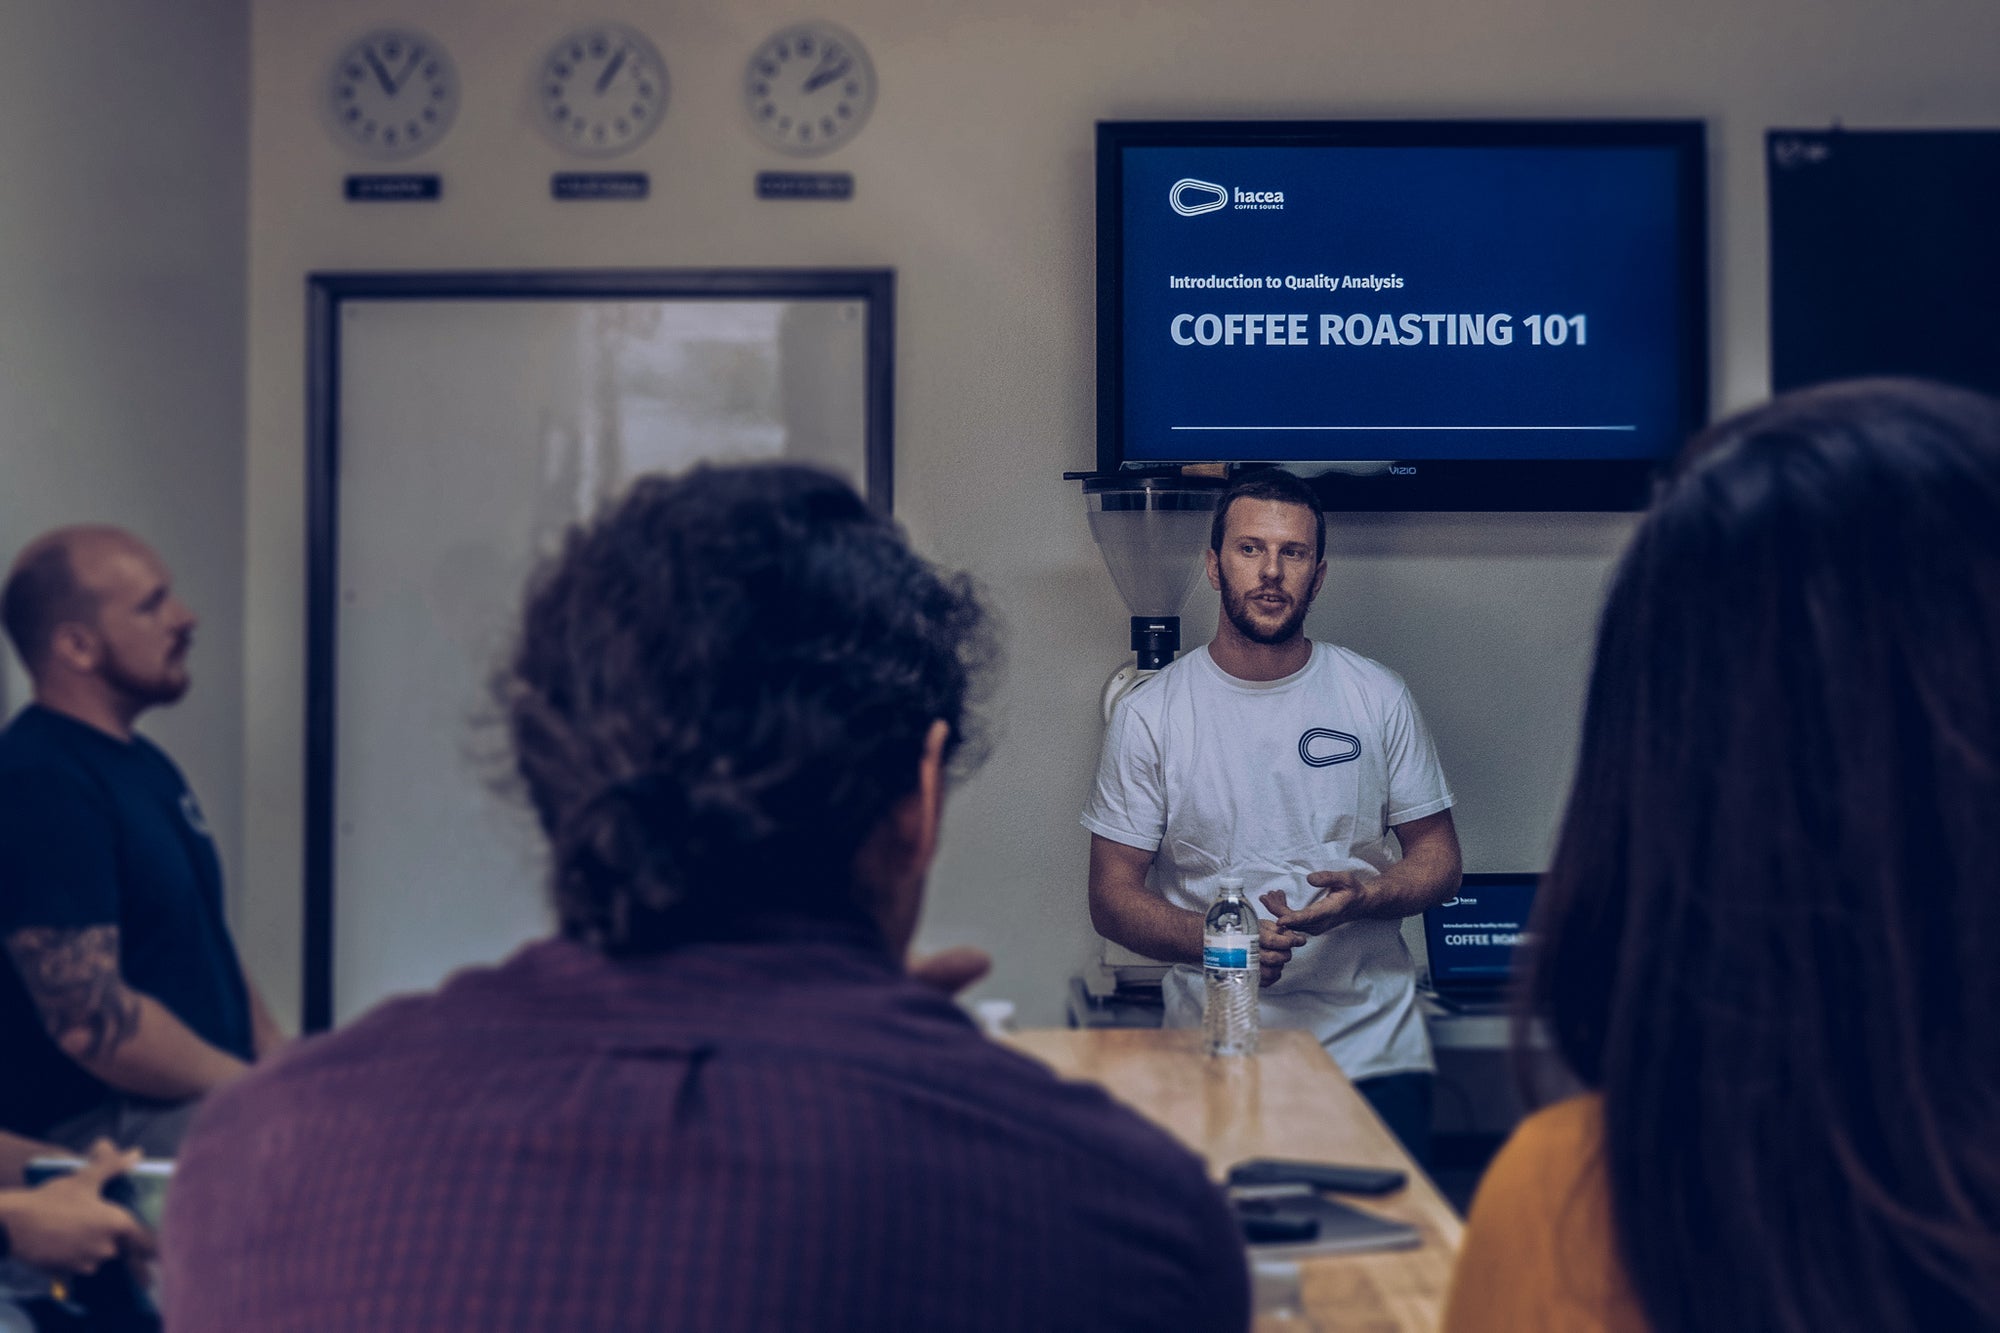 Coffee Roasting 101 - Introduction to Coffee Roasting - March 2nd